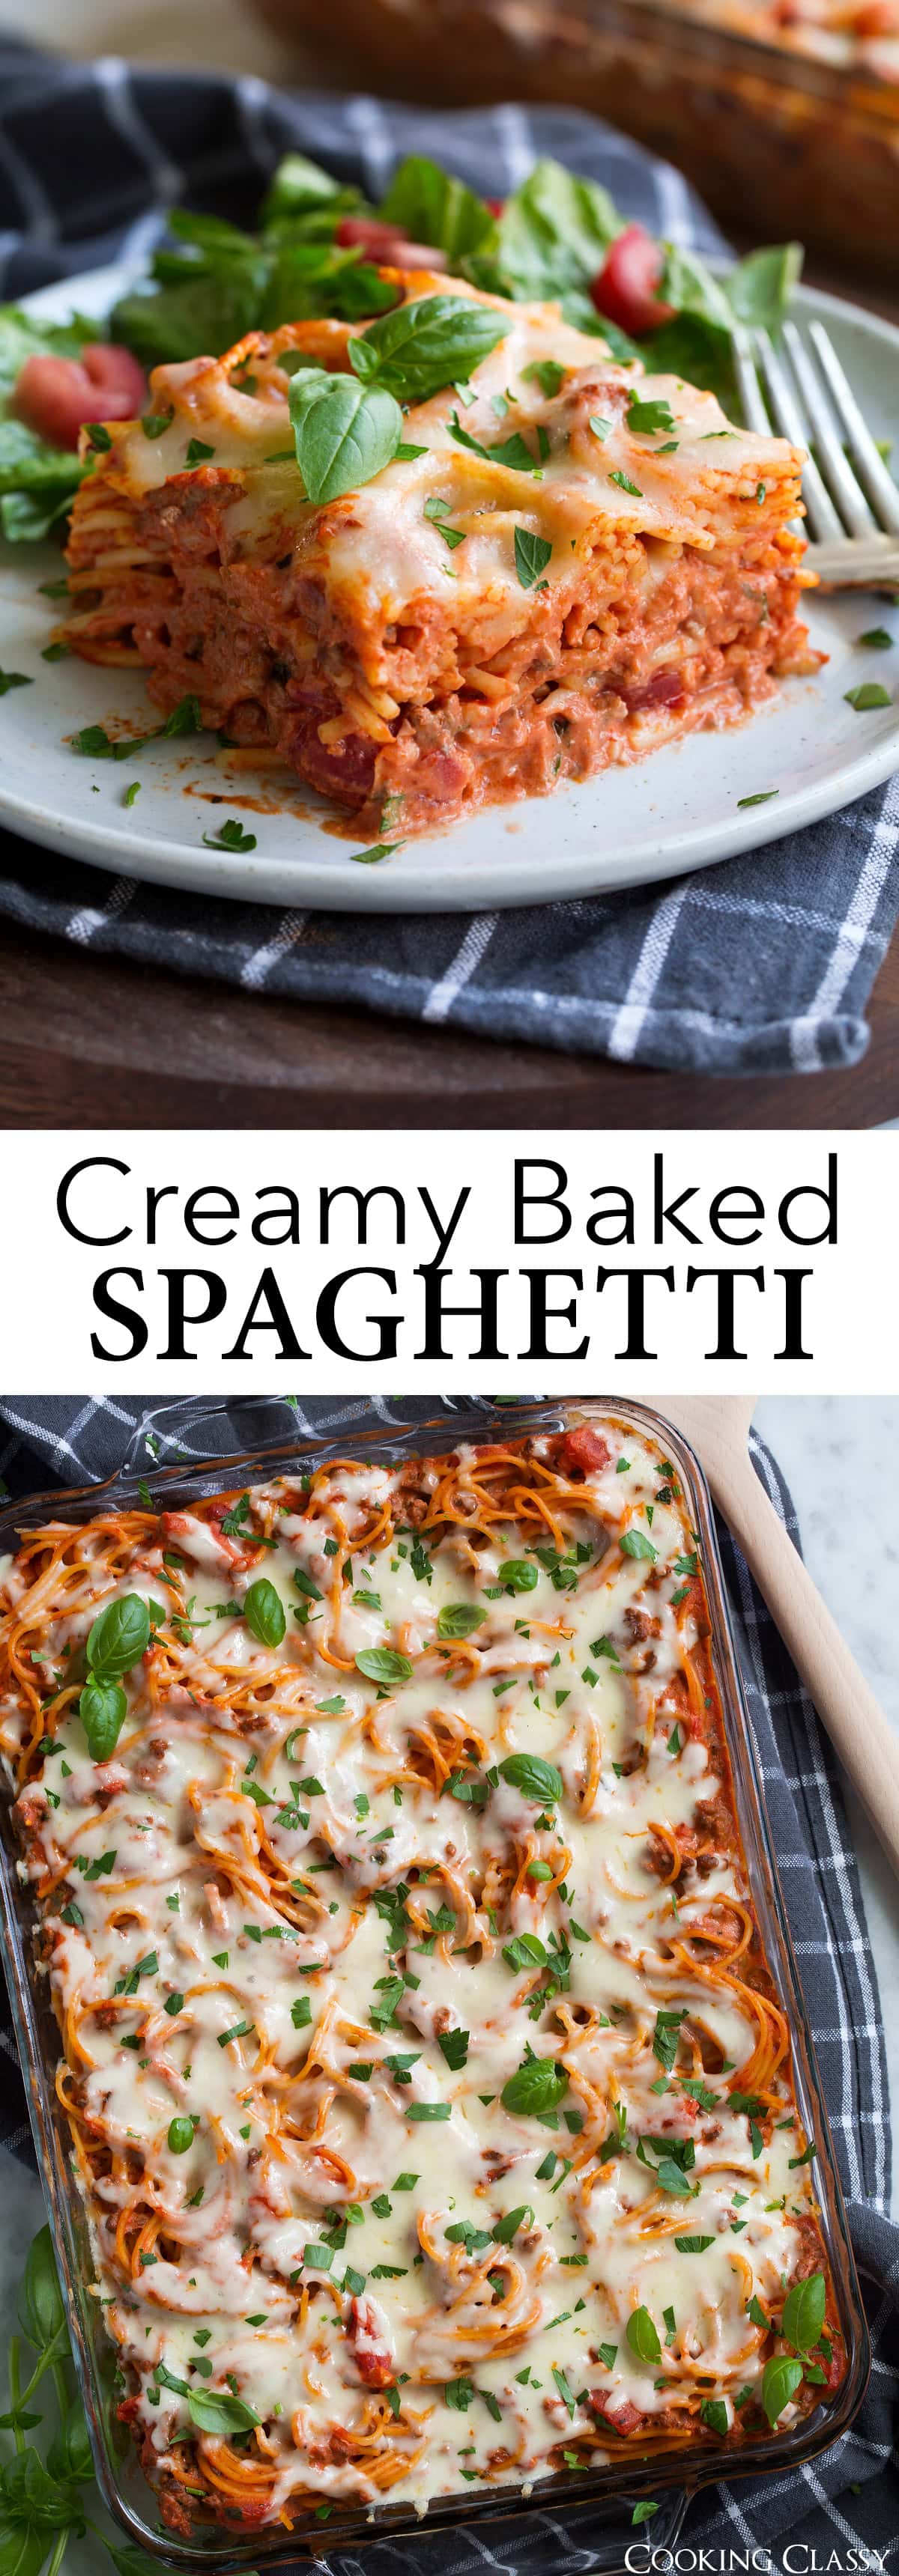 Easy Baked Spaghetti Recipe - Cooking Classy